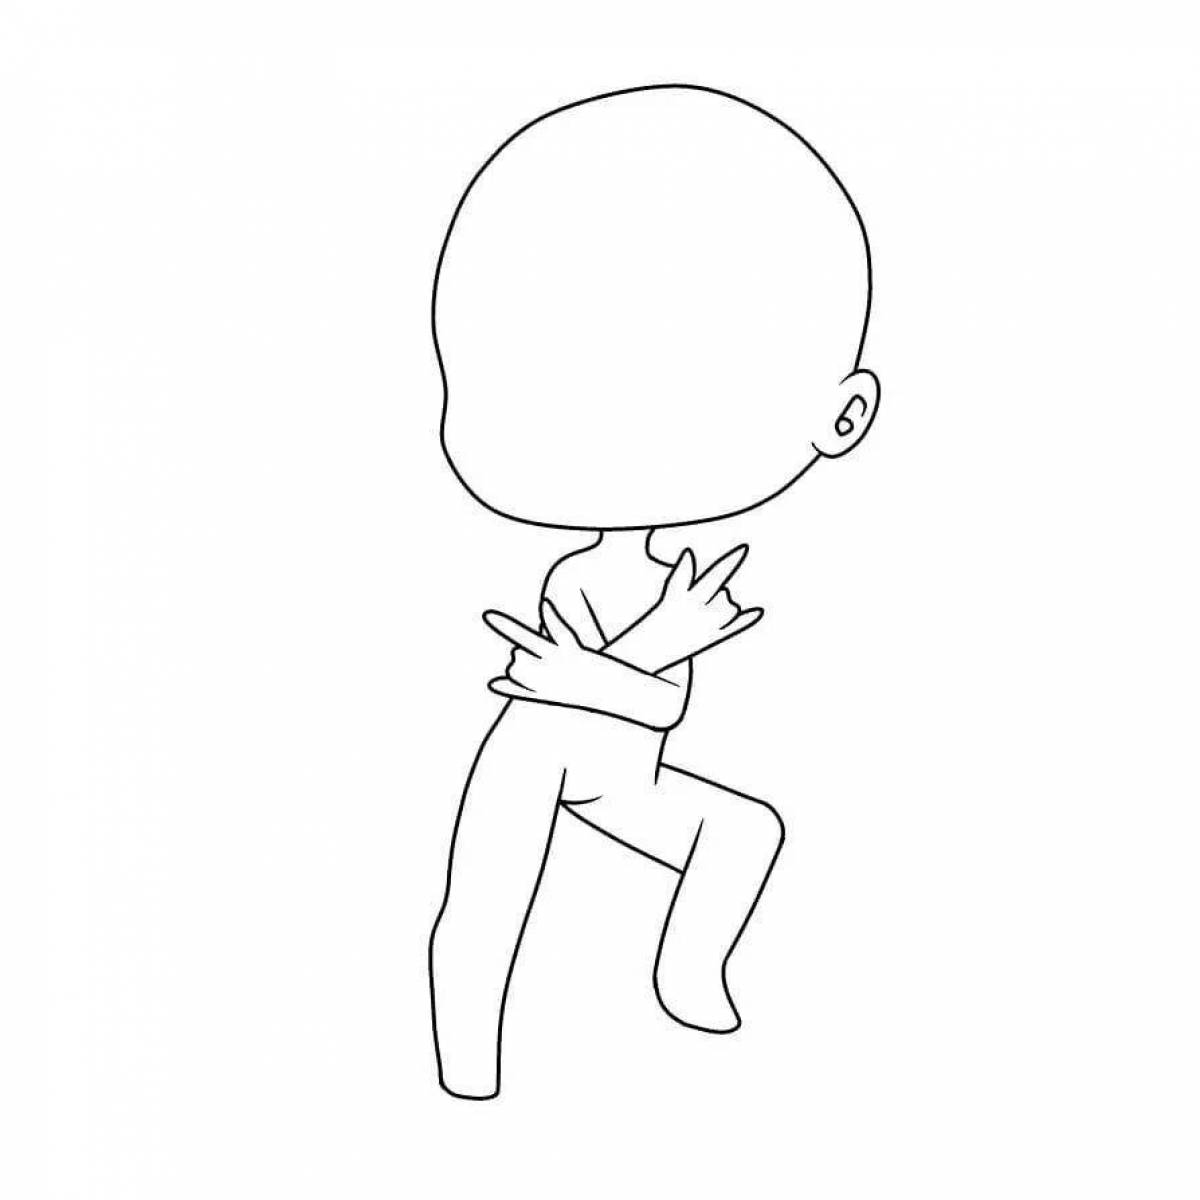 Colorful body gacha life coloring page